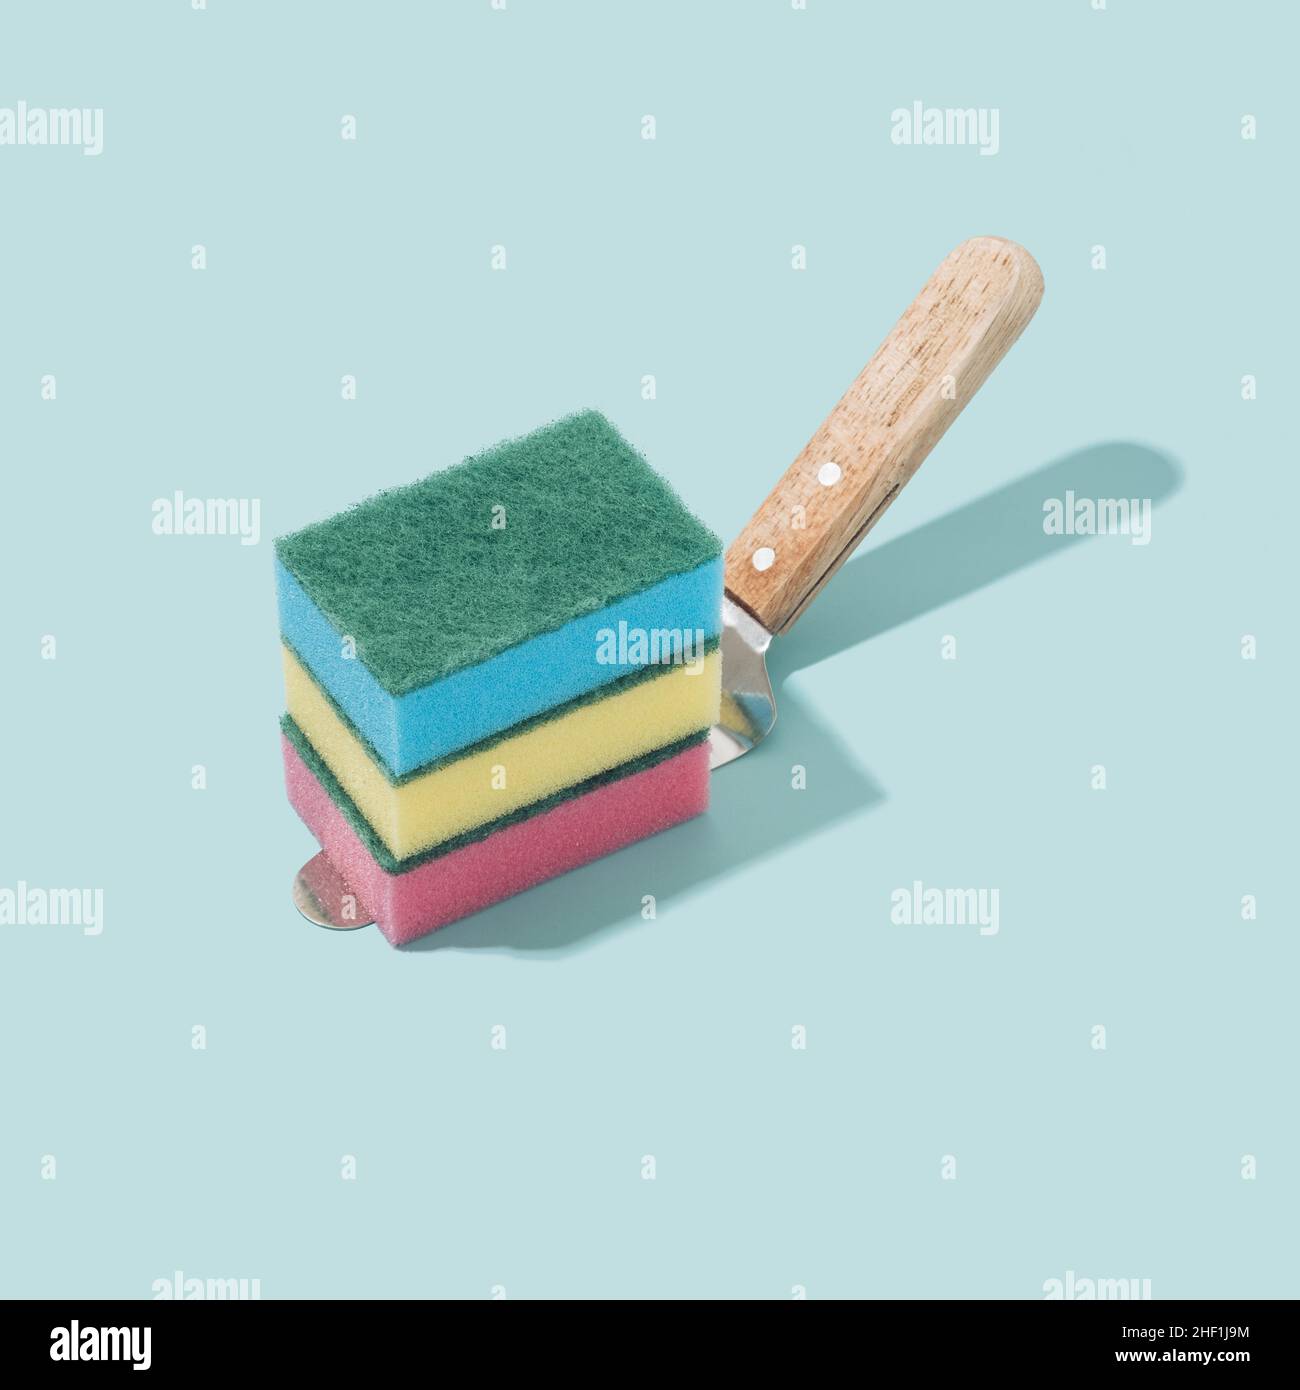 Colorful sponges on a cake spatula and pastel blue background. Immersive reality fantasy concept. Stock Photo